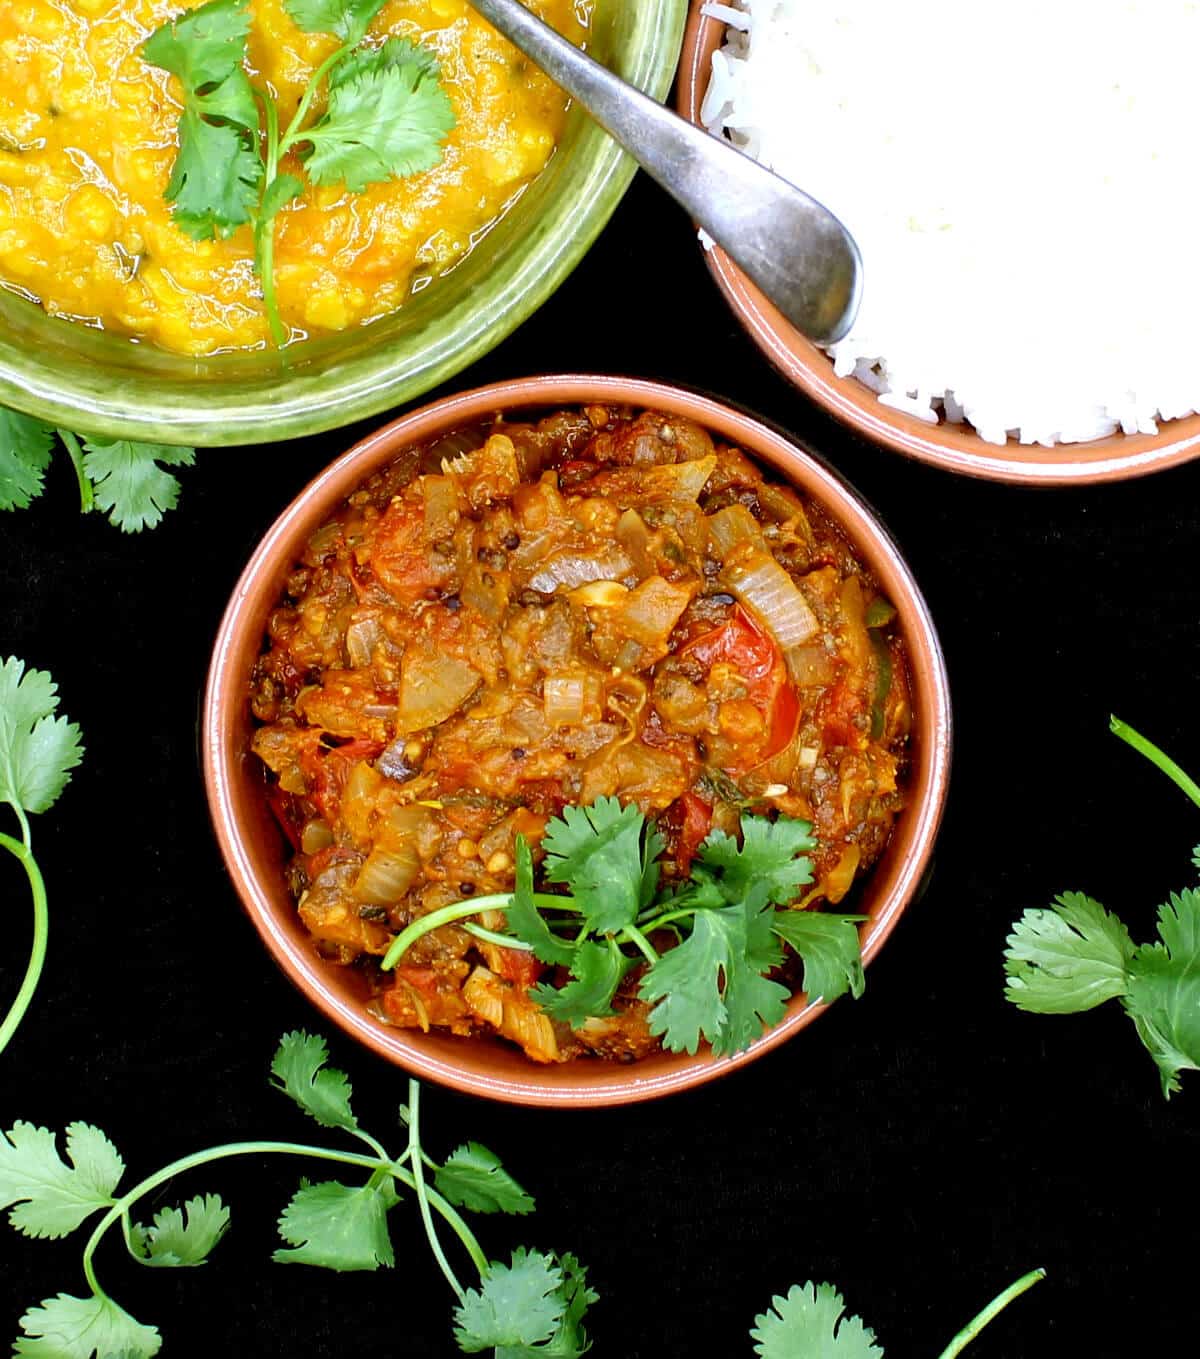 Baingan Bharta garnished with cilantro in clay bowl. Next to it are tomato dal and rice with a spoon.